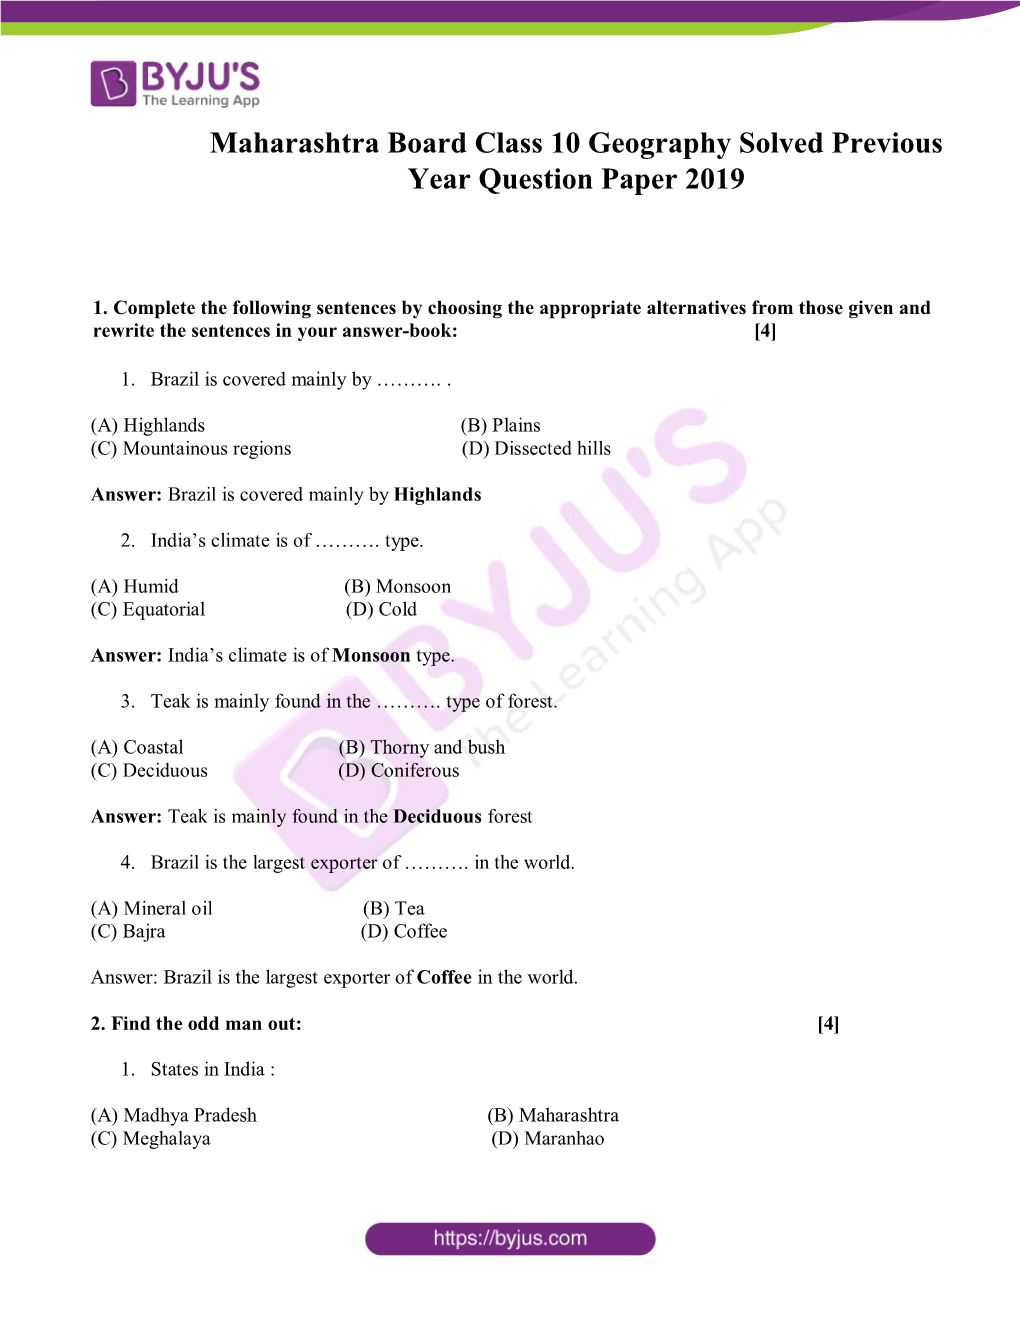 Maharashtra Board Class 10 Geography Solved Previous Year Question Paper 2019